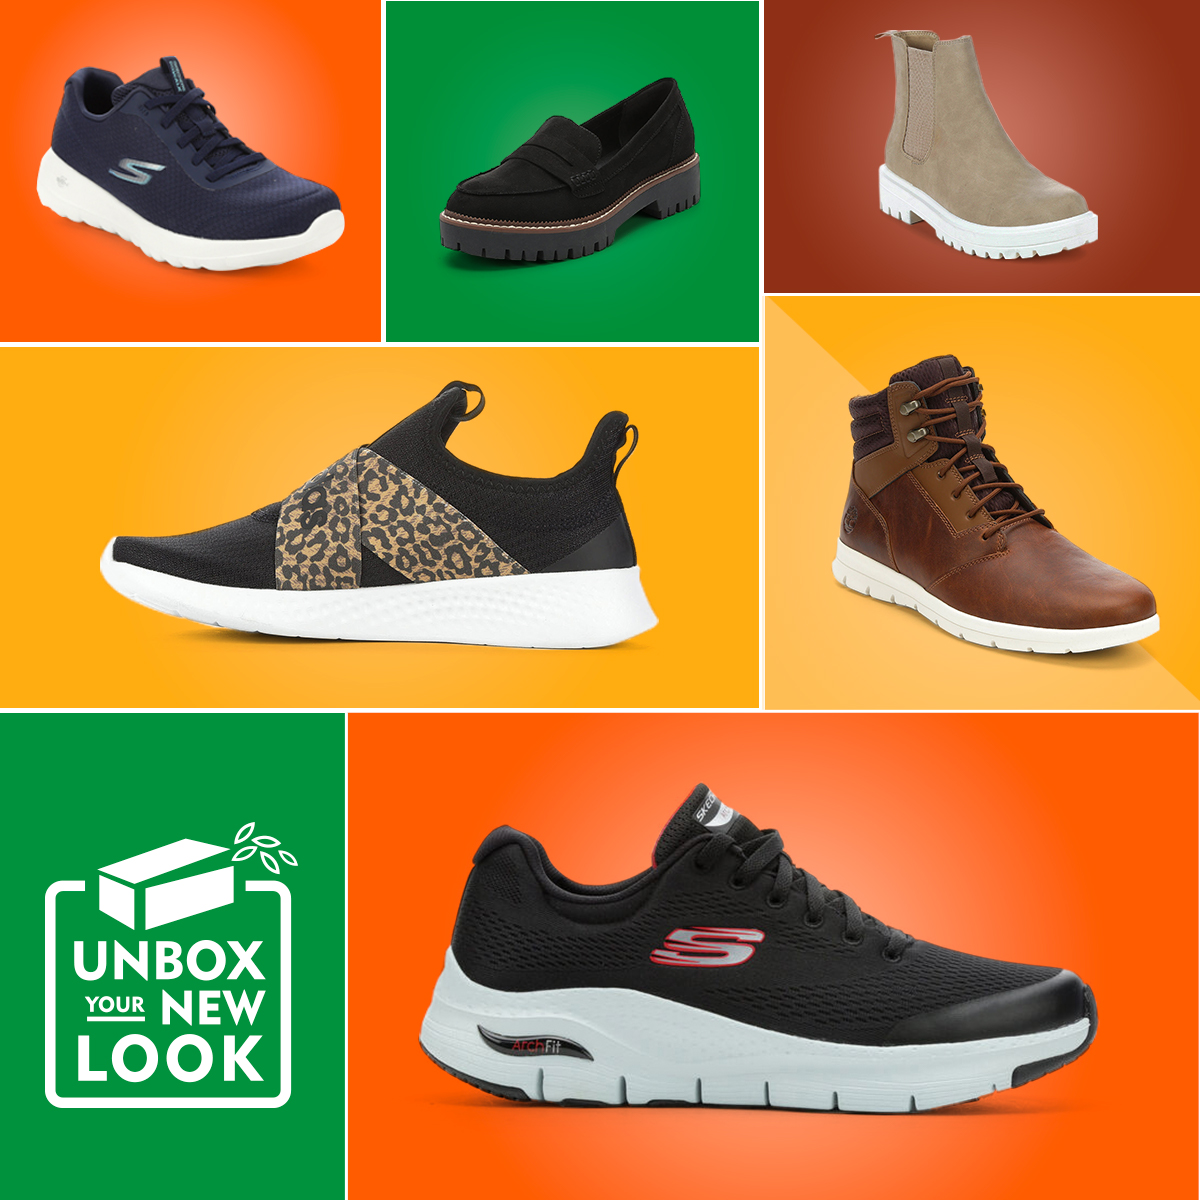 Most Comfortable Shoes, Sandals, & Pumps - Unboxed with Shoe Carnival